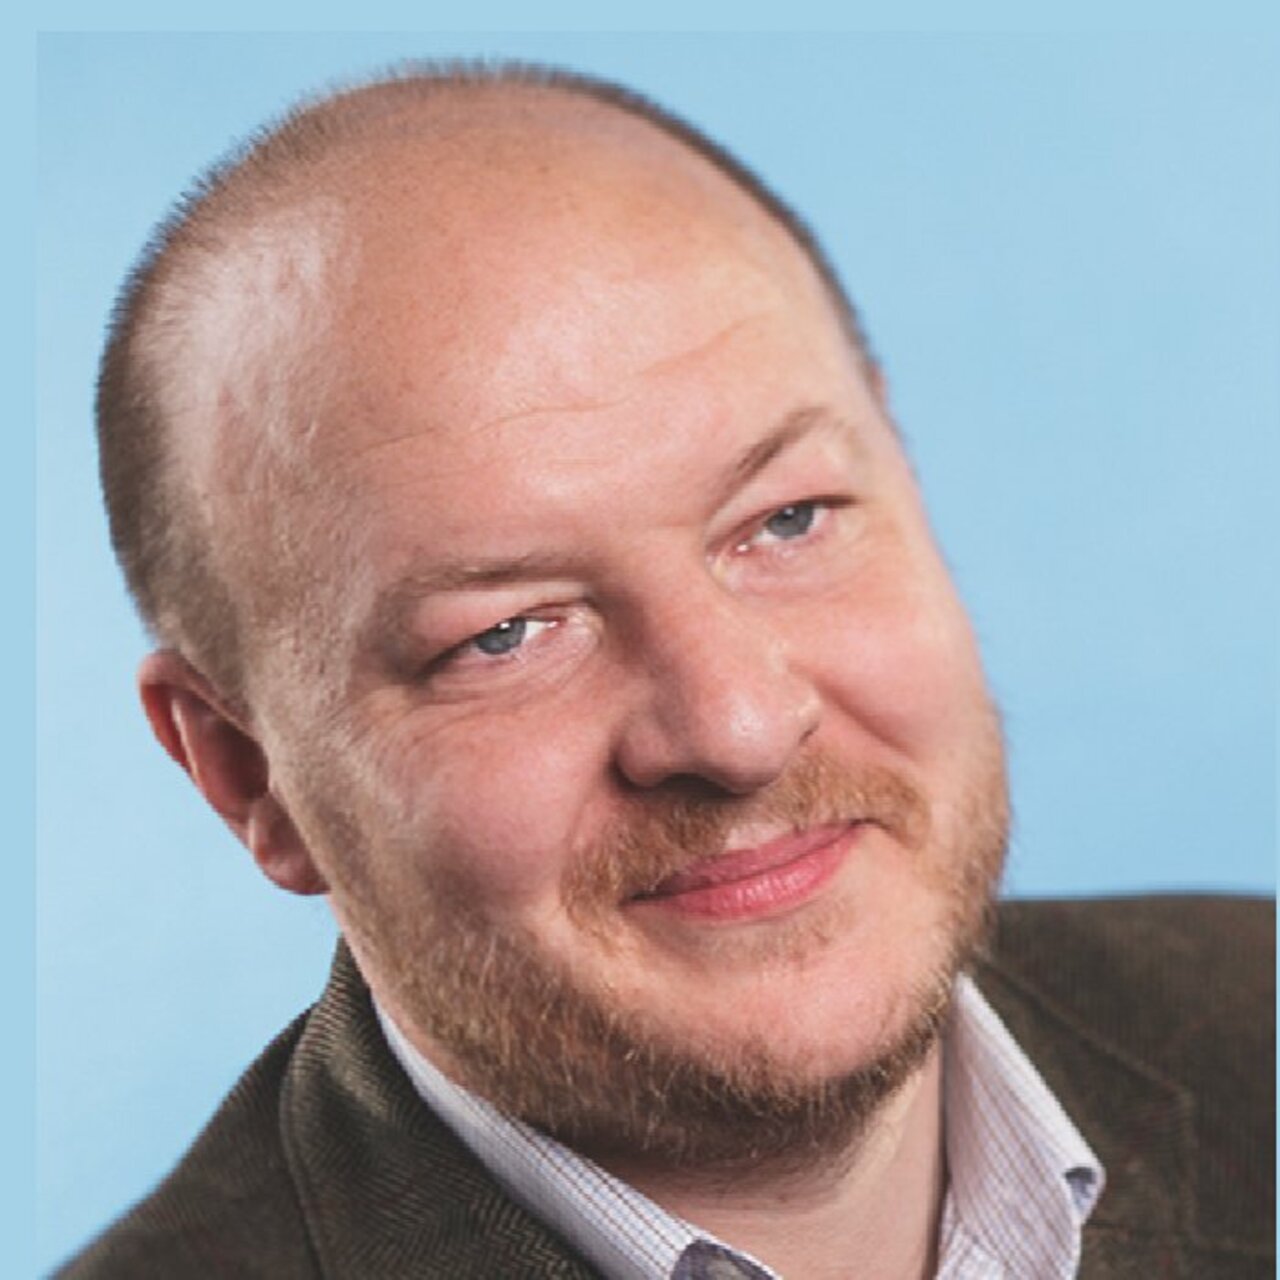 SimonWardley @swardley will b chair of "#Cloud Camp 1Step Beyond" http://ow.ly/YwuYV https://t.co/XS5maJTQKn